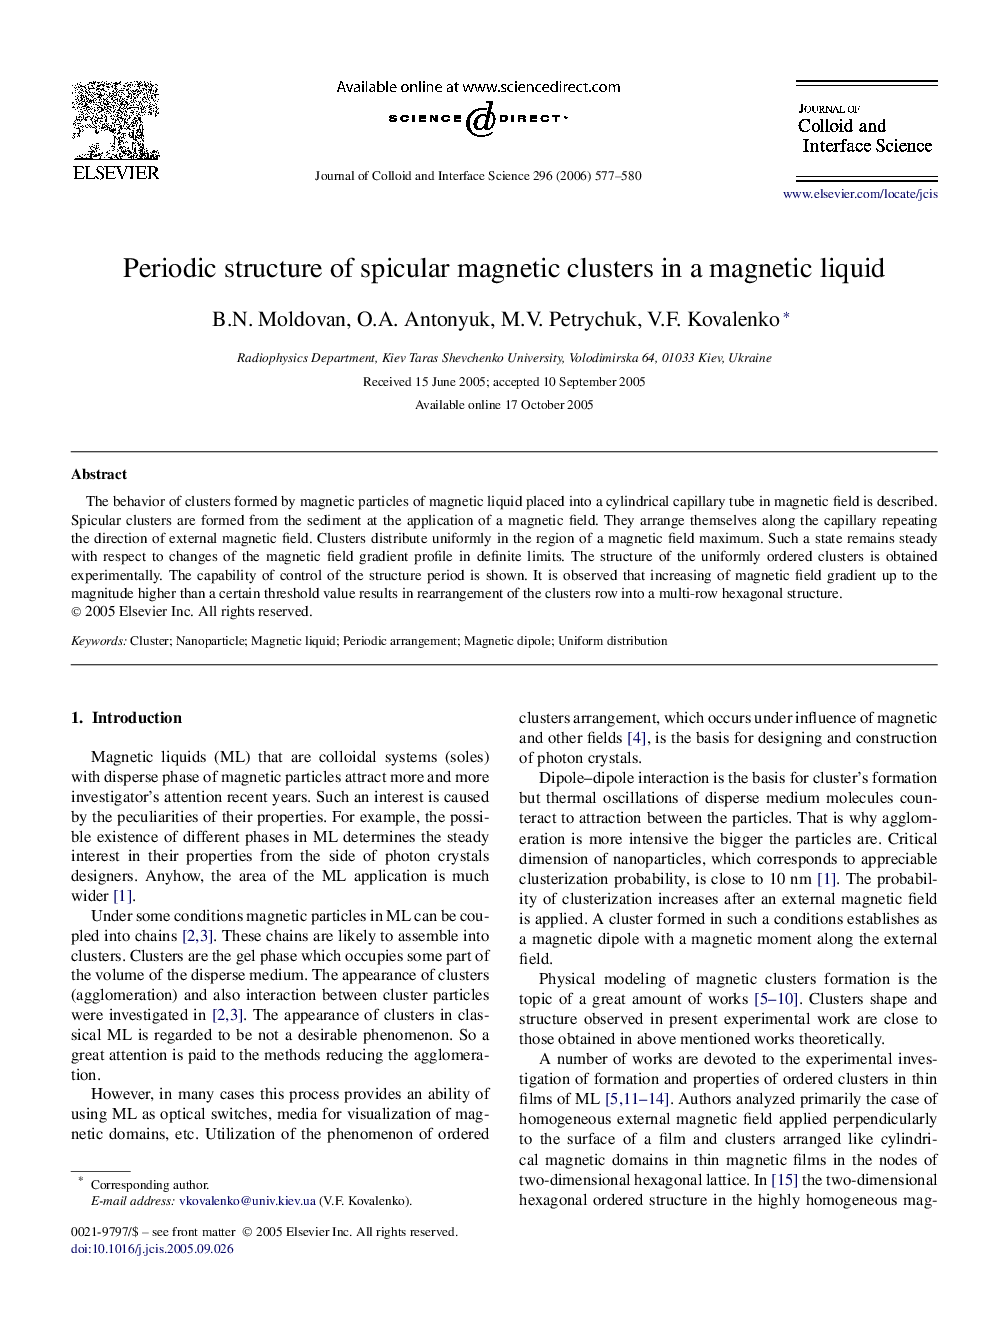 Periodic structure of spicular magnetic clusters in a magnetic liquid